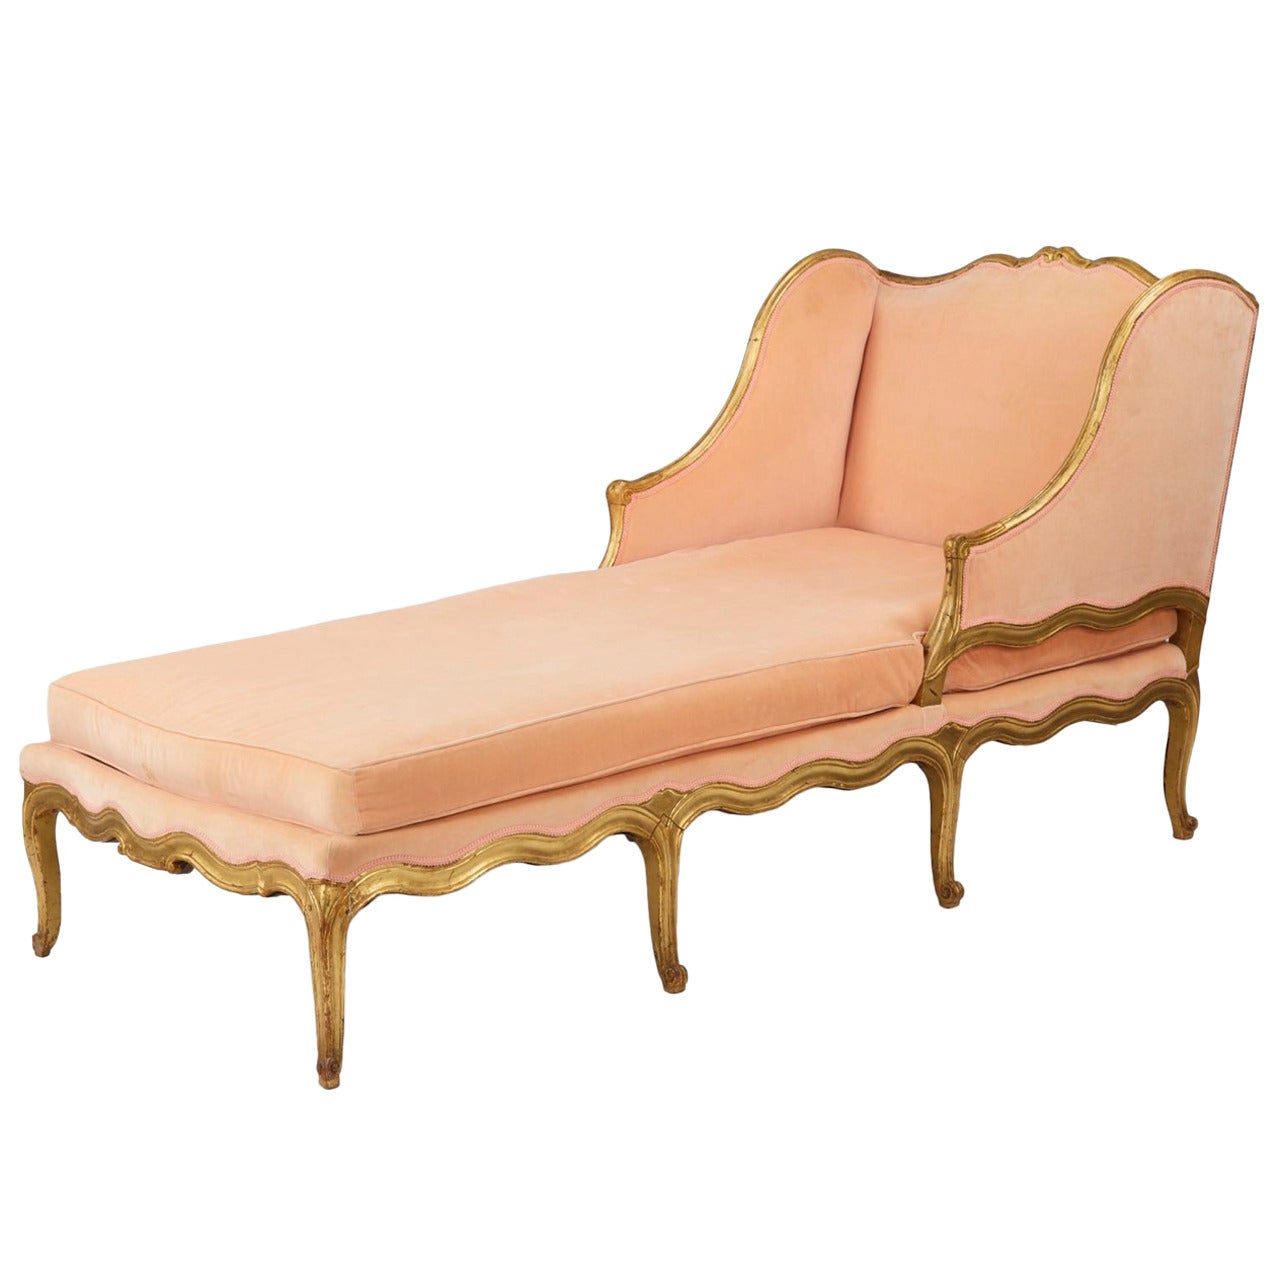 French Louis XV Style Giltwood Antique Chaise Longue Lounge Settee, 19th Century